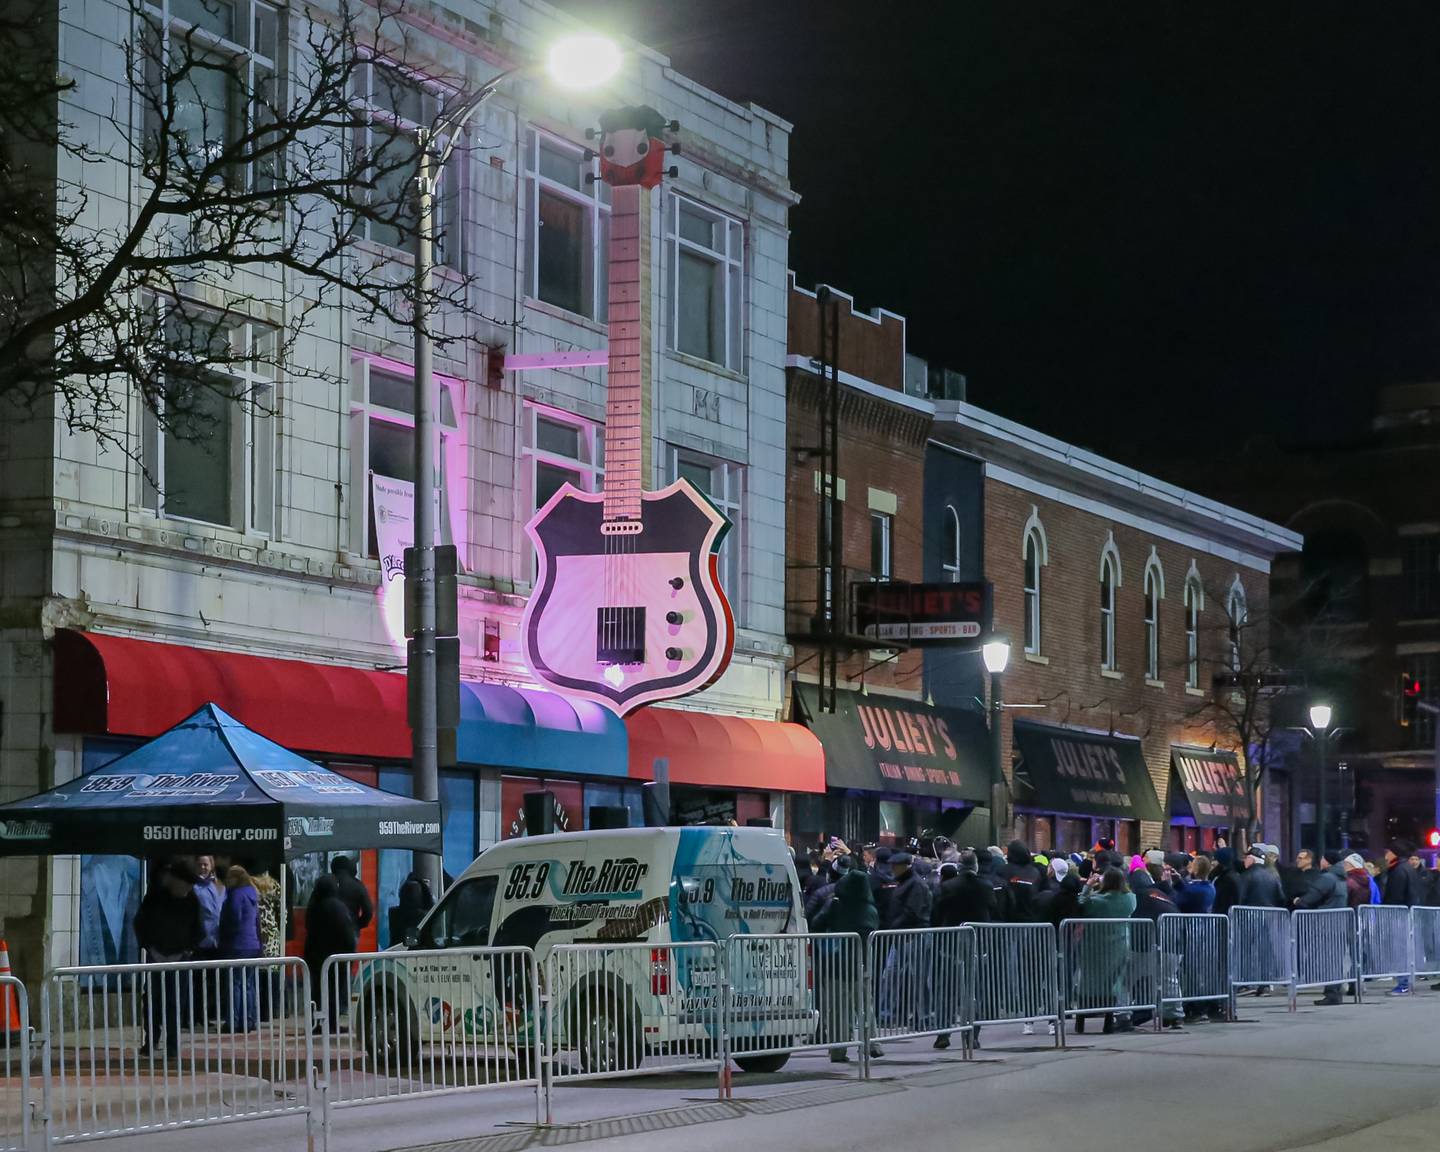 A large crowd gathered during the GIGANTAR celebratory lighting ceremony at the Illinois Rock and Roll museum.  Jan 20, 2023.